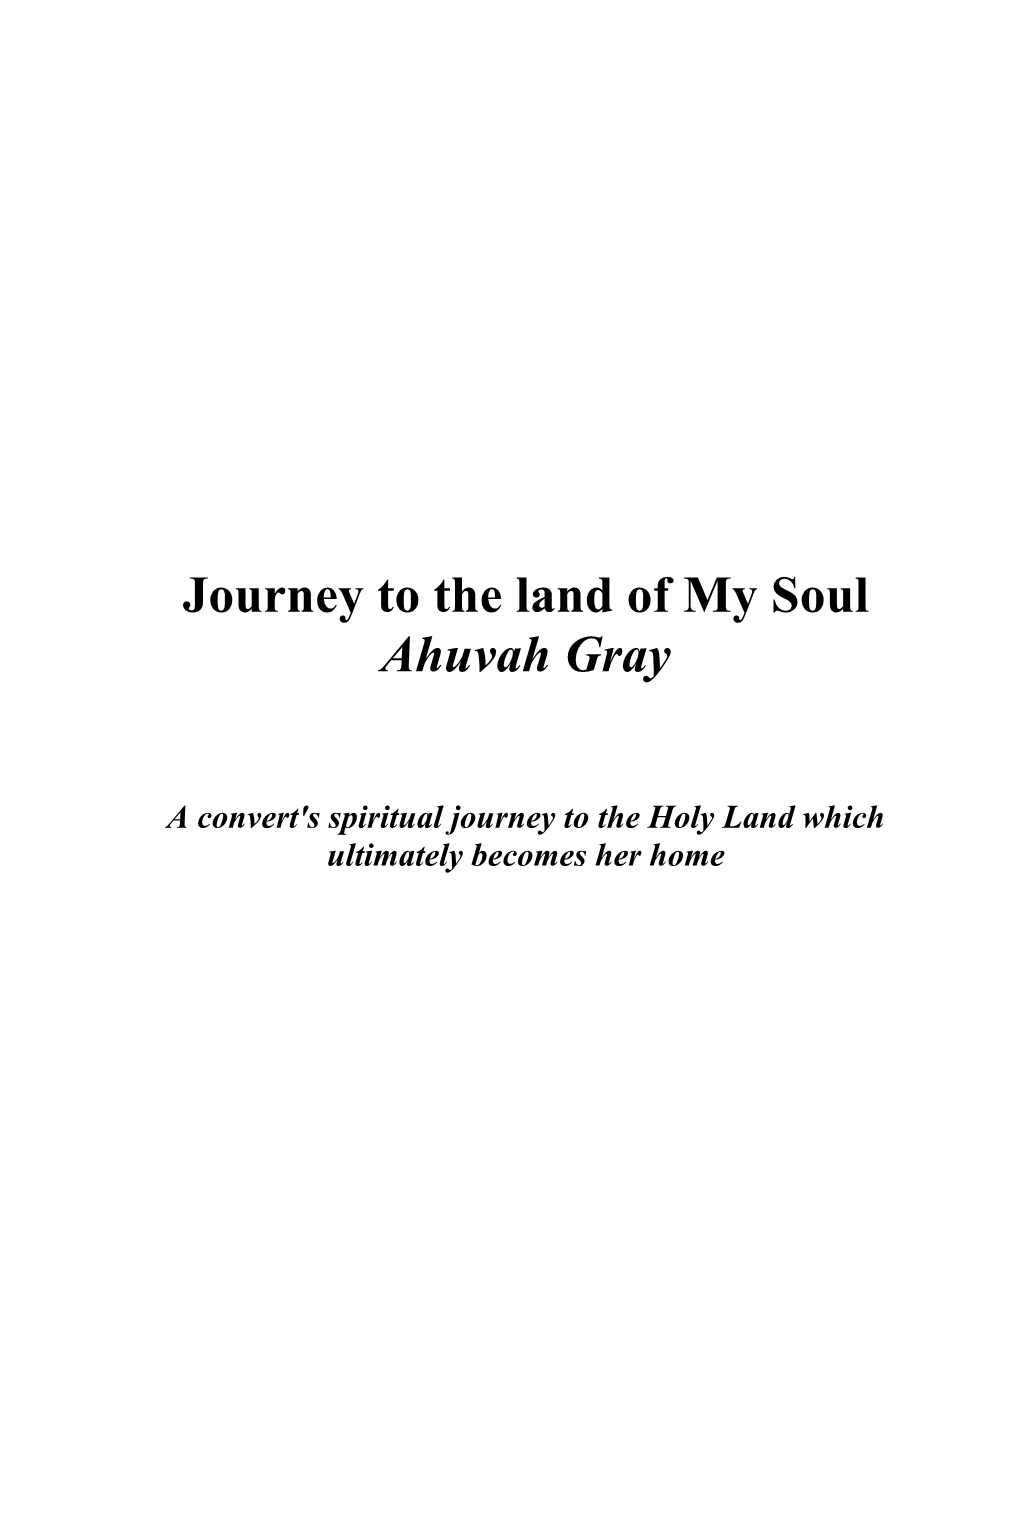 Journey to the Land of My Soul Nonum- Feb 4 2010